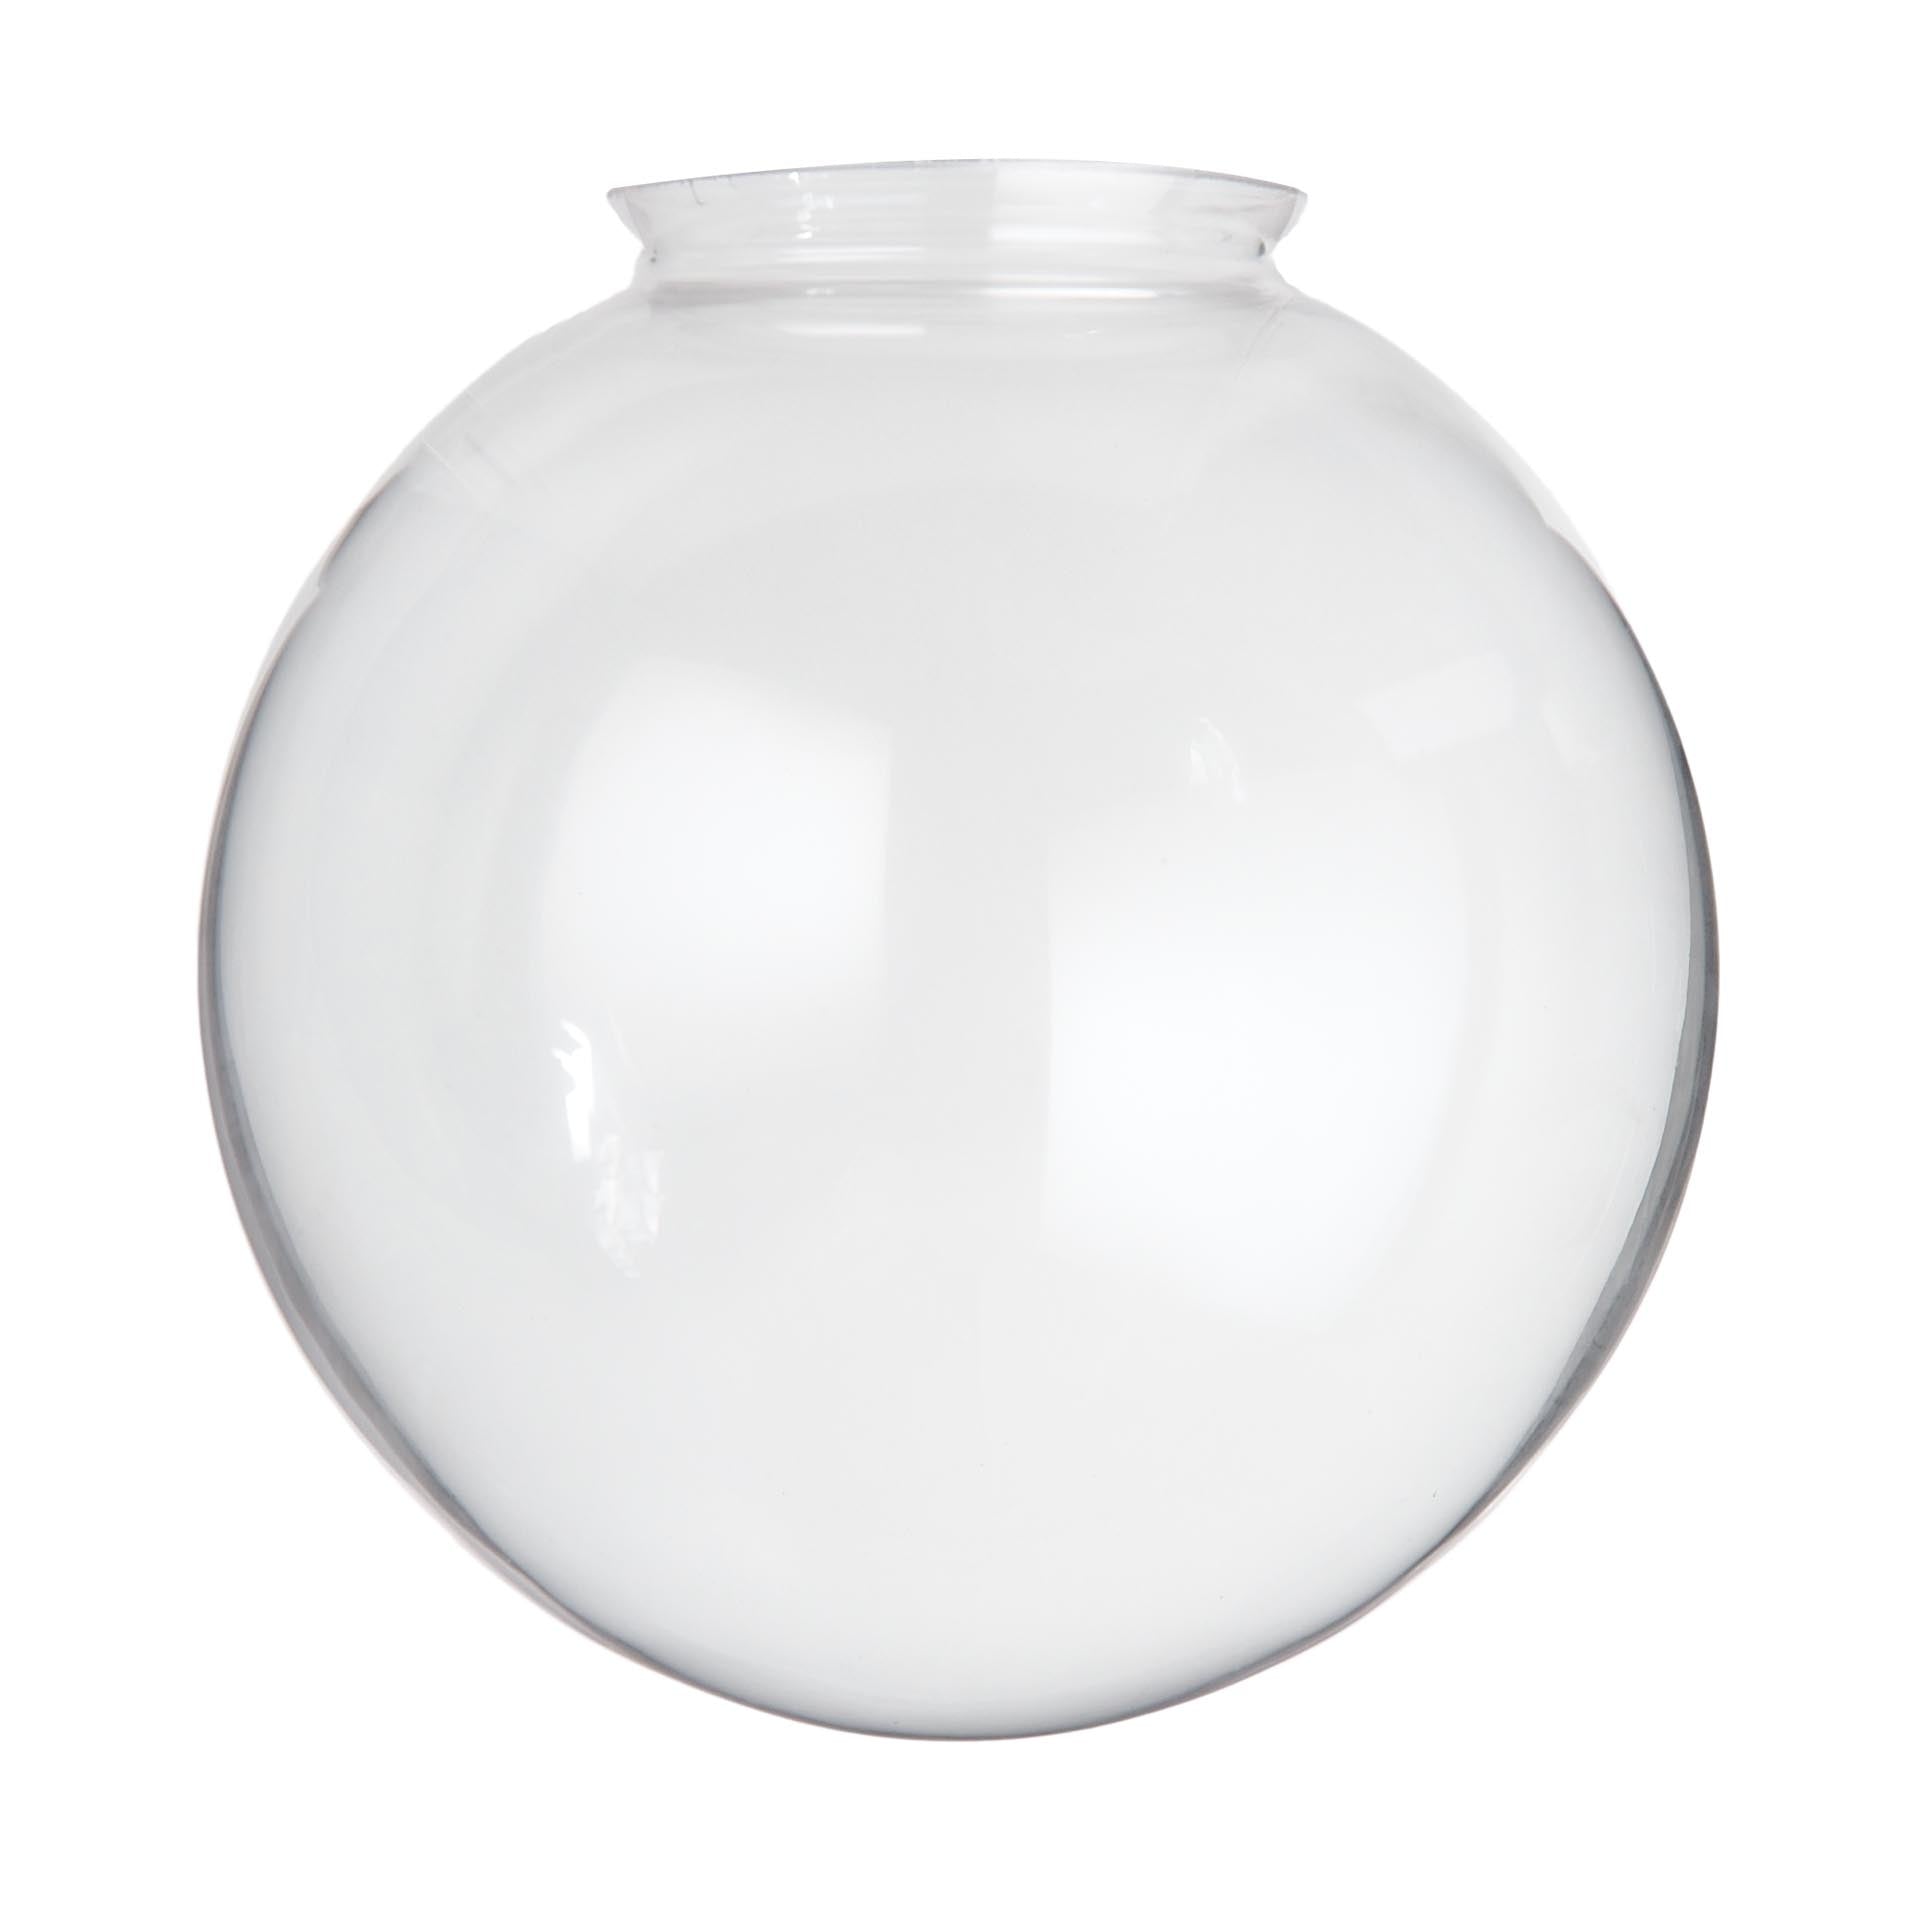 8" Dia. Clear Glass Ball Pendant Shade, 4" Fitter